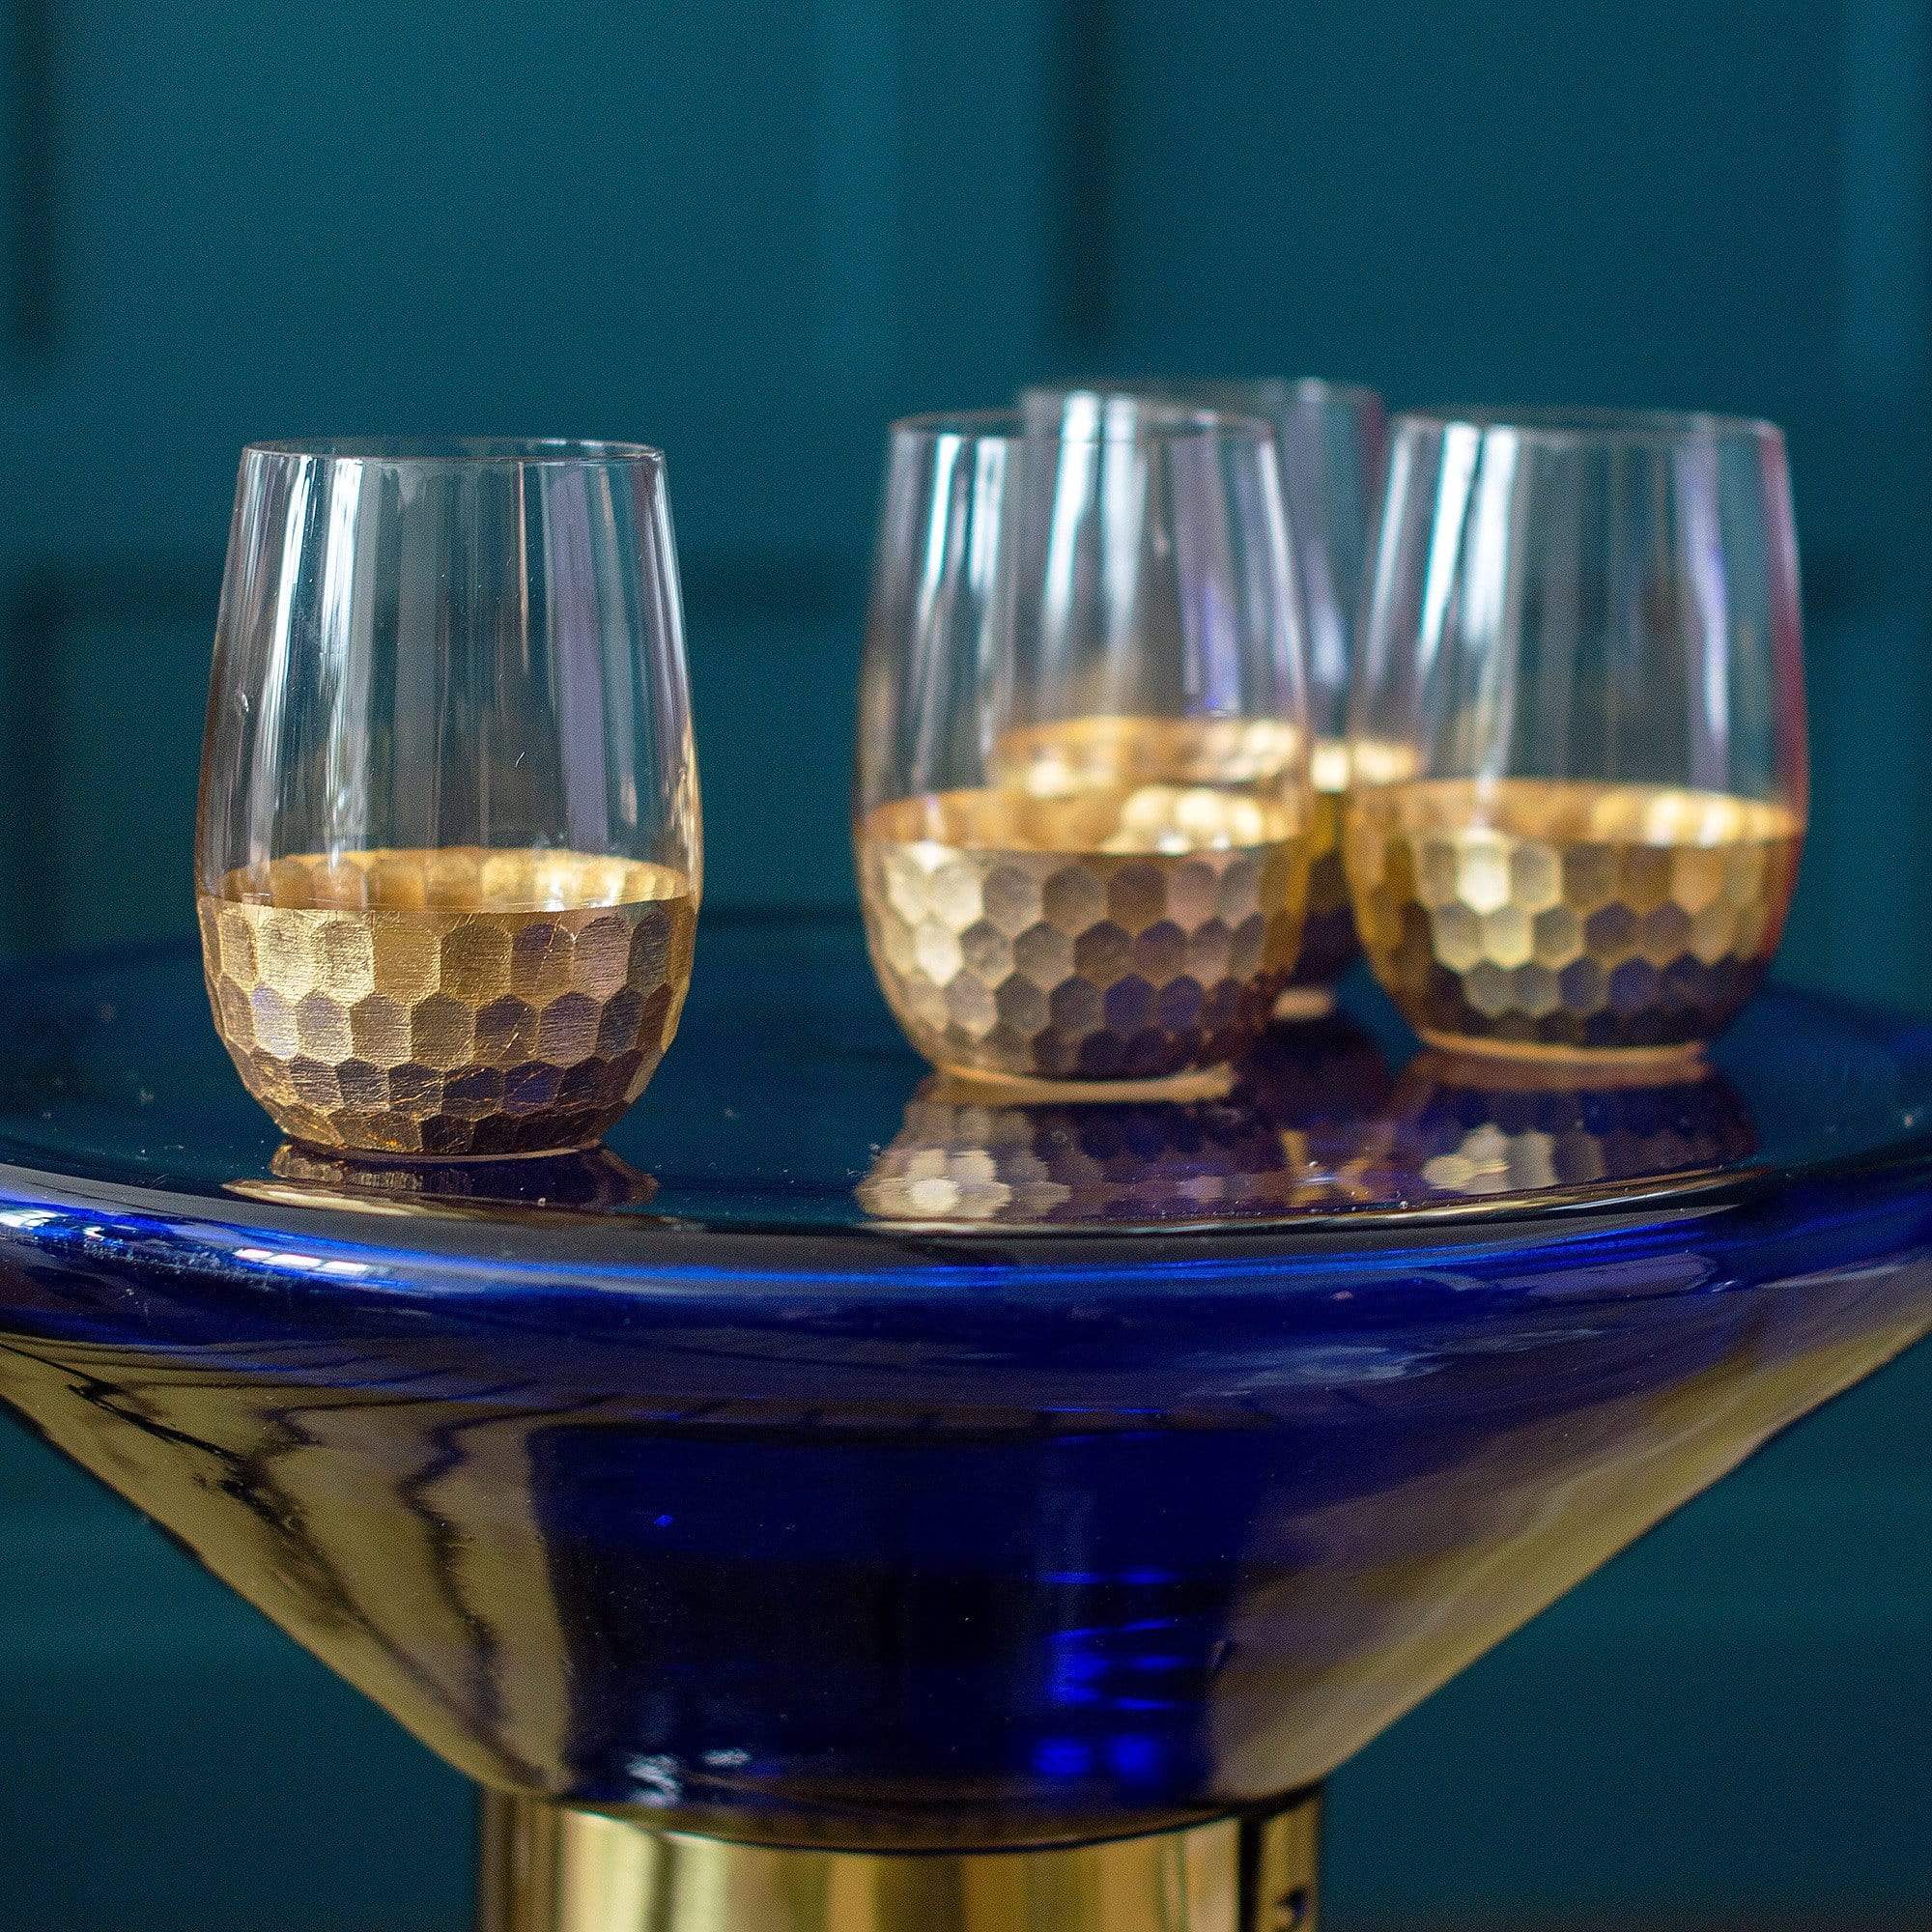 Hammered Gold Glass Tumblers | Set of 4